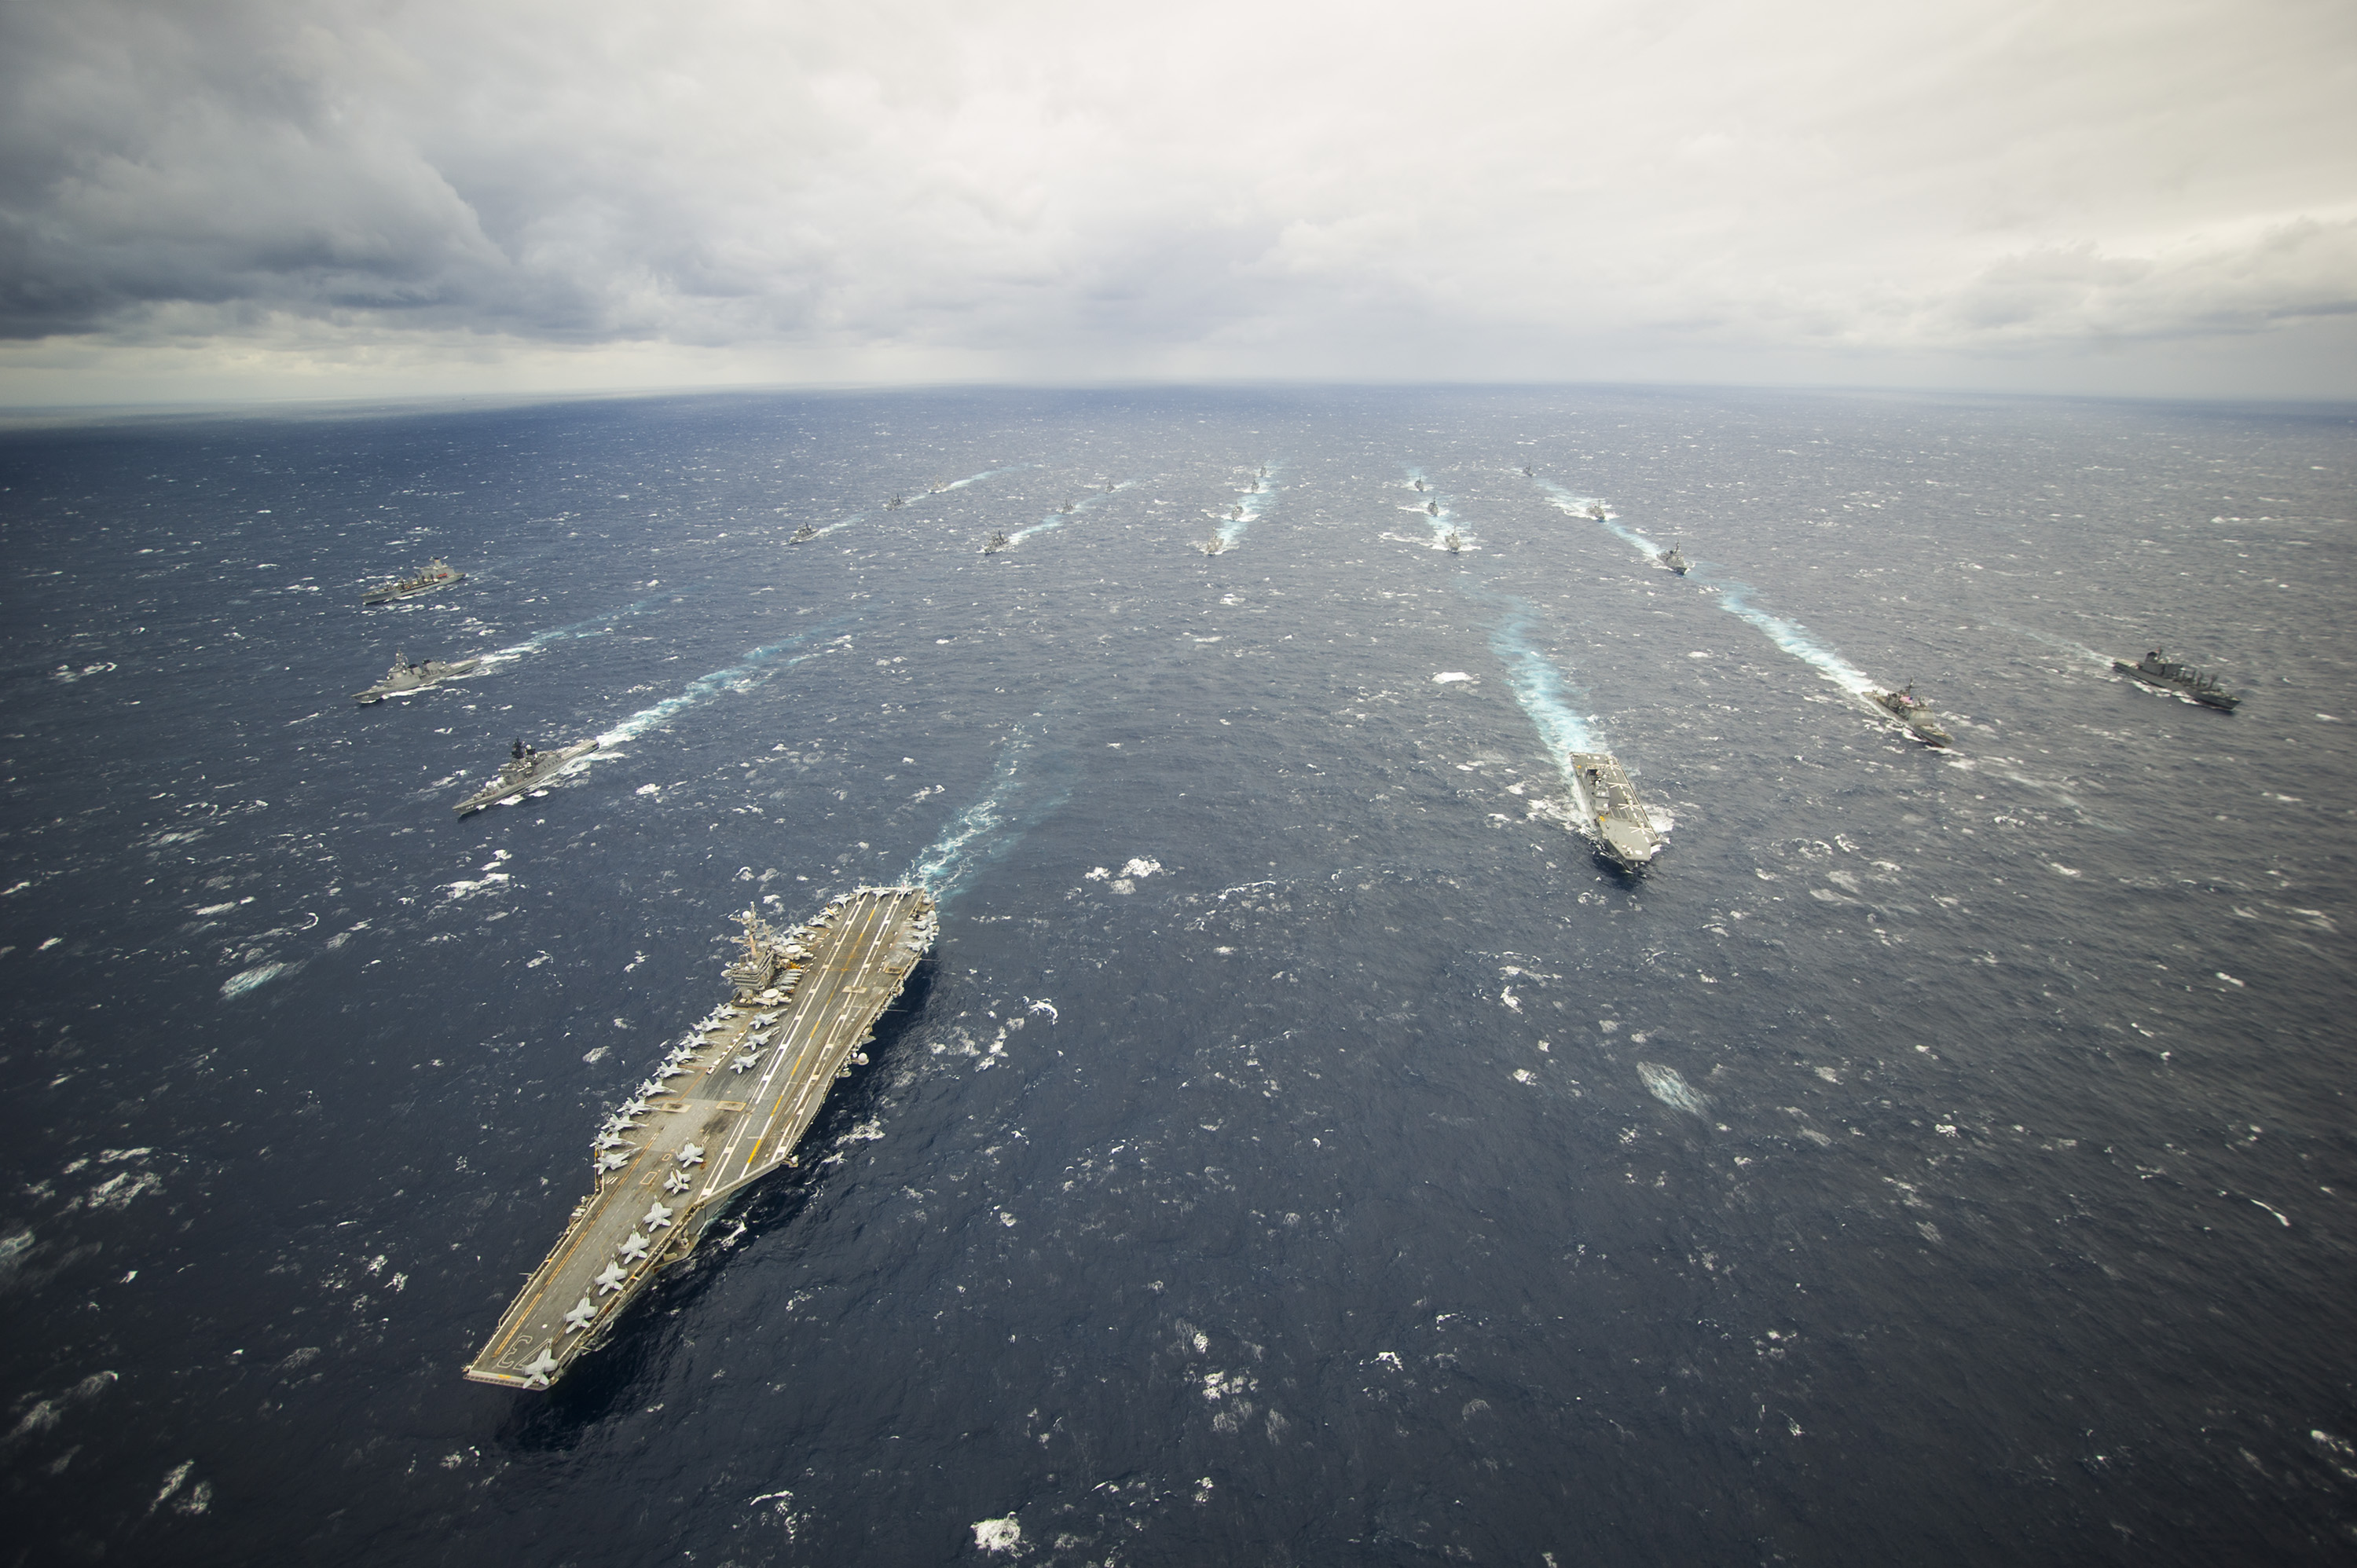 USS George Washington (CVN-73) and its strike group in 2013. The House voted to refuel the carrier rather than decommission the ship. US Navy Photo